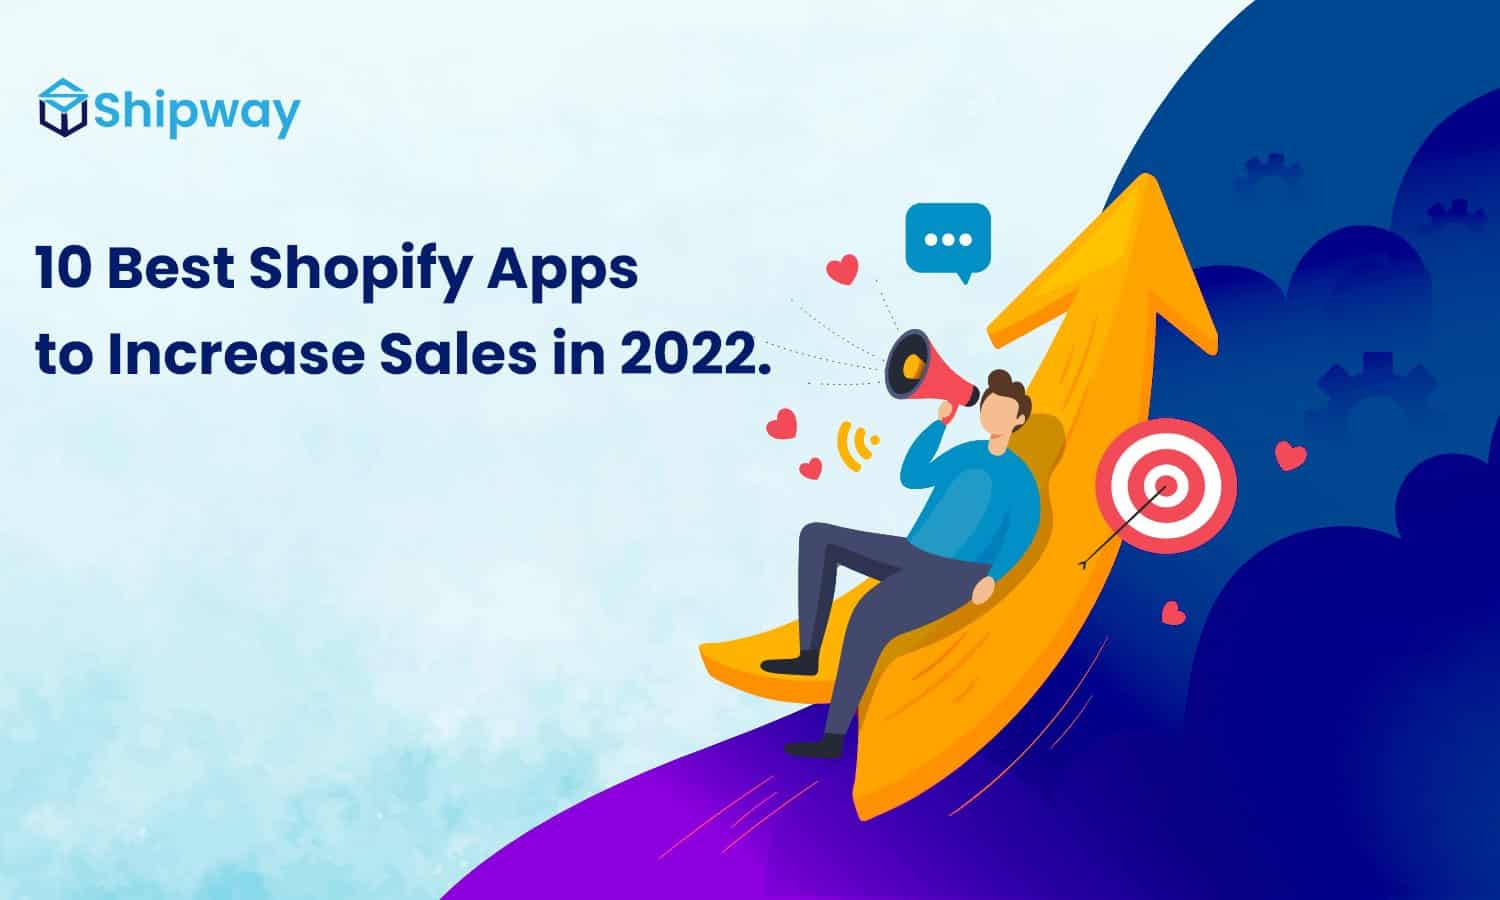 10 Best Shopify Apps to Increase Sales in 2022